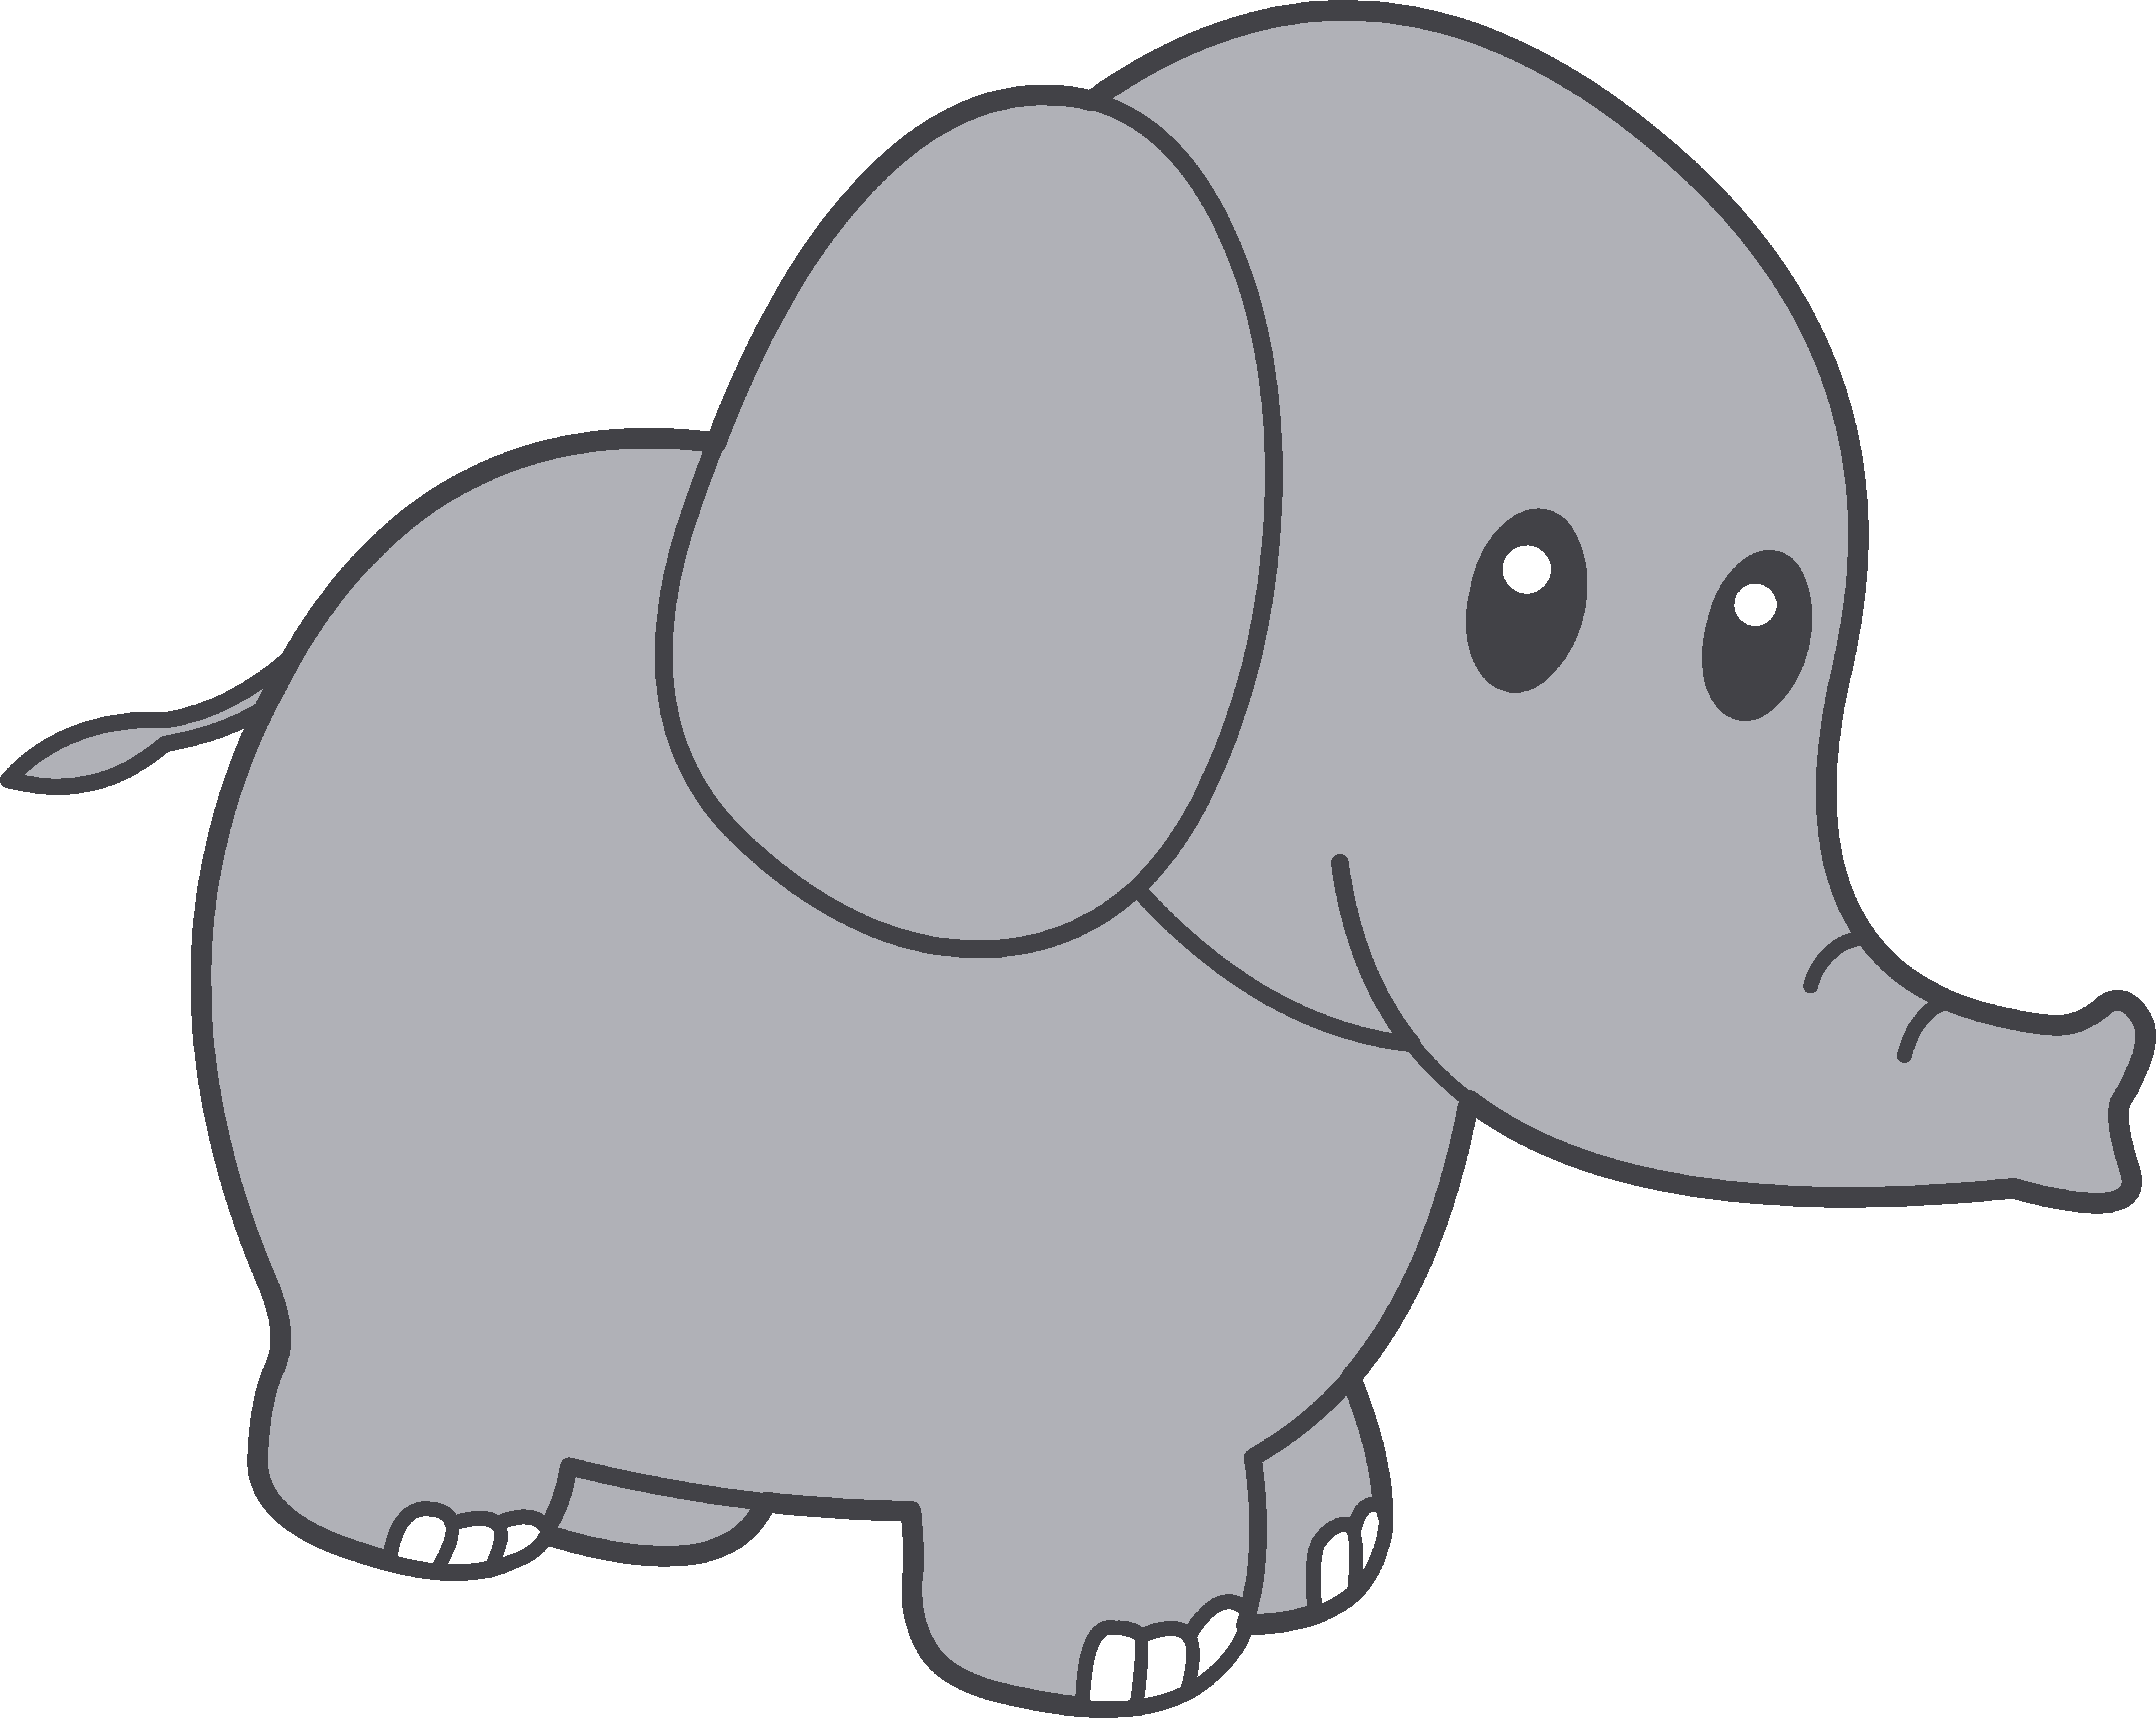 Cute Elephant Cartoon Images & Pictures - Becuo